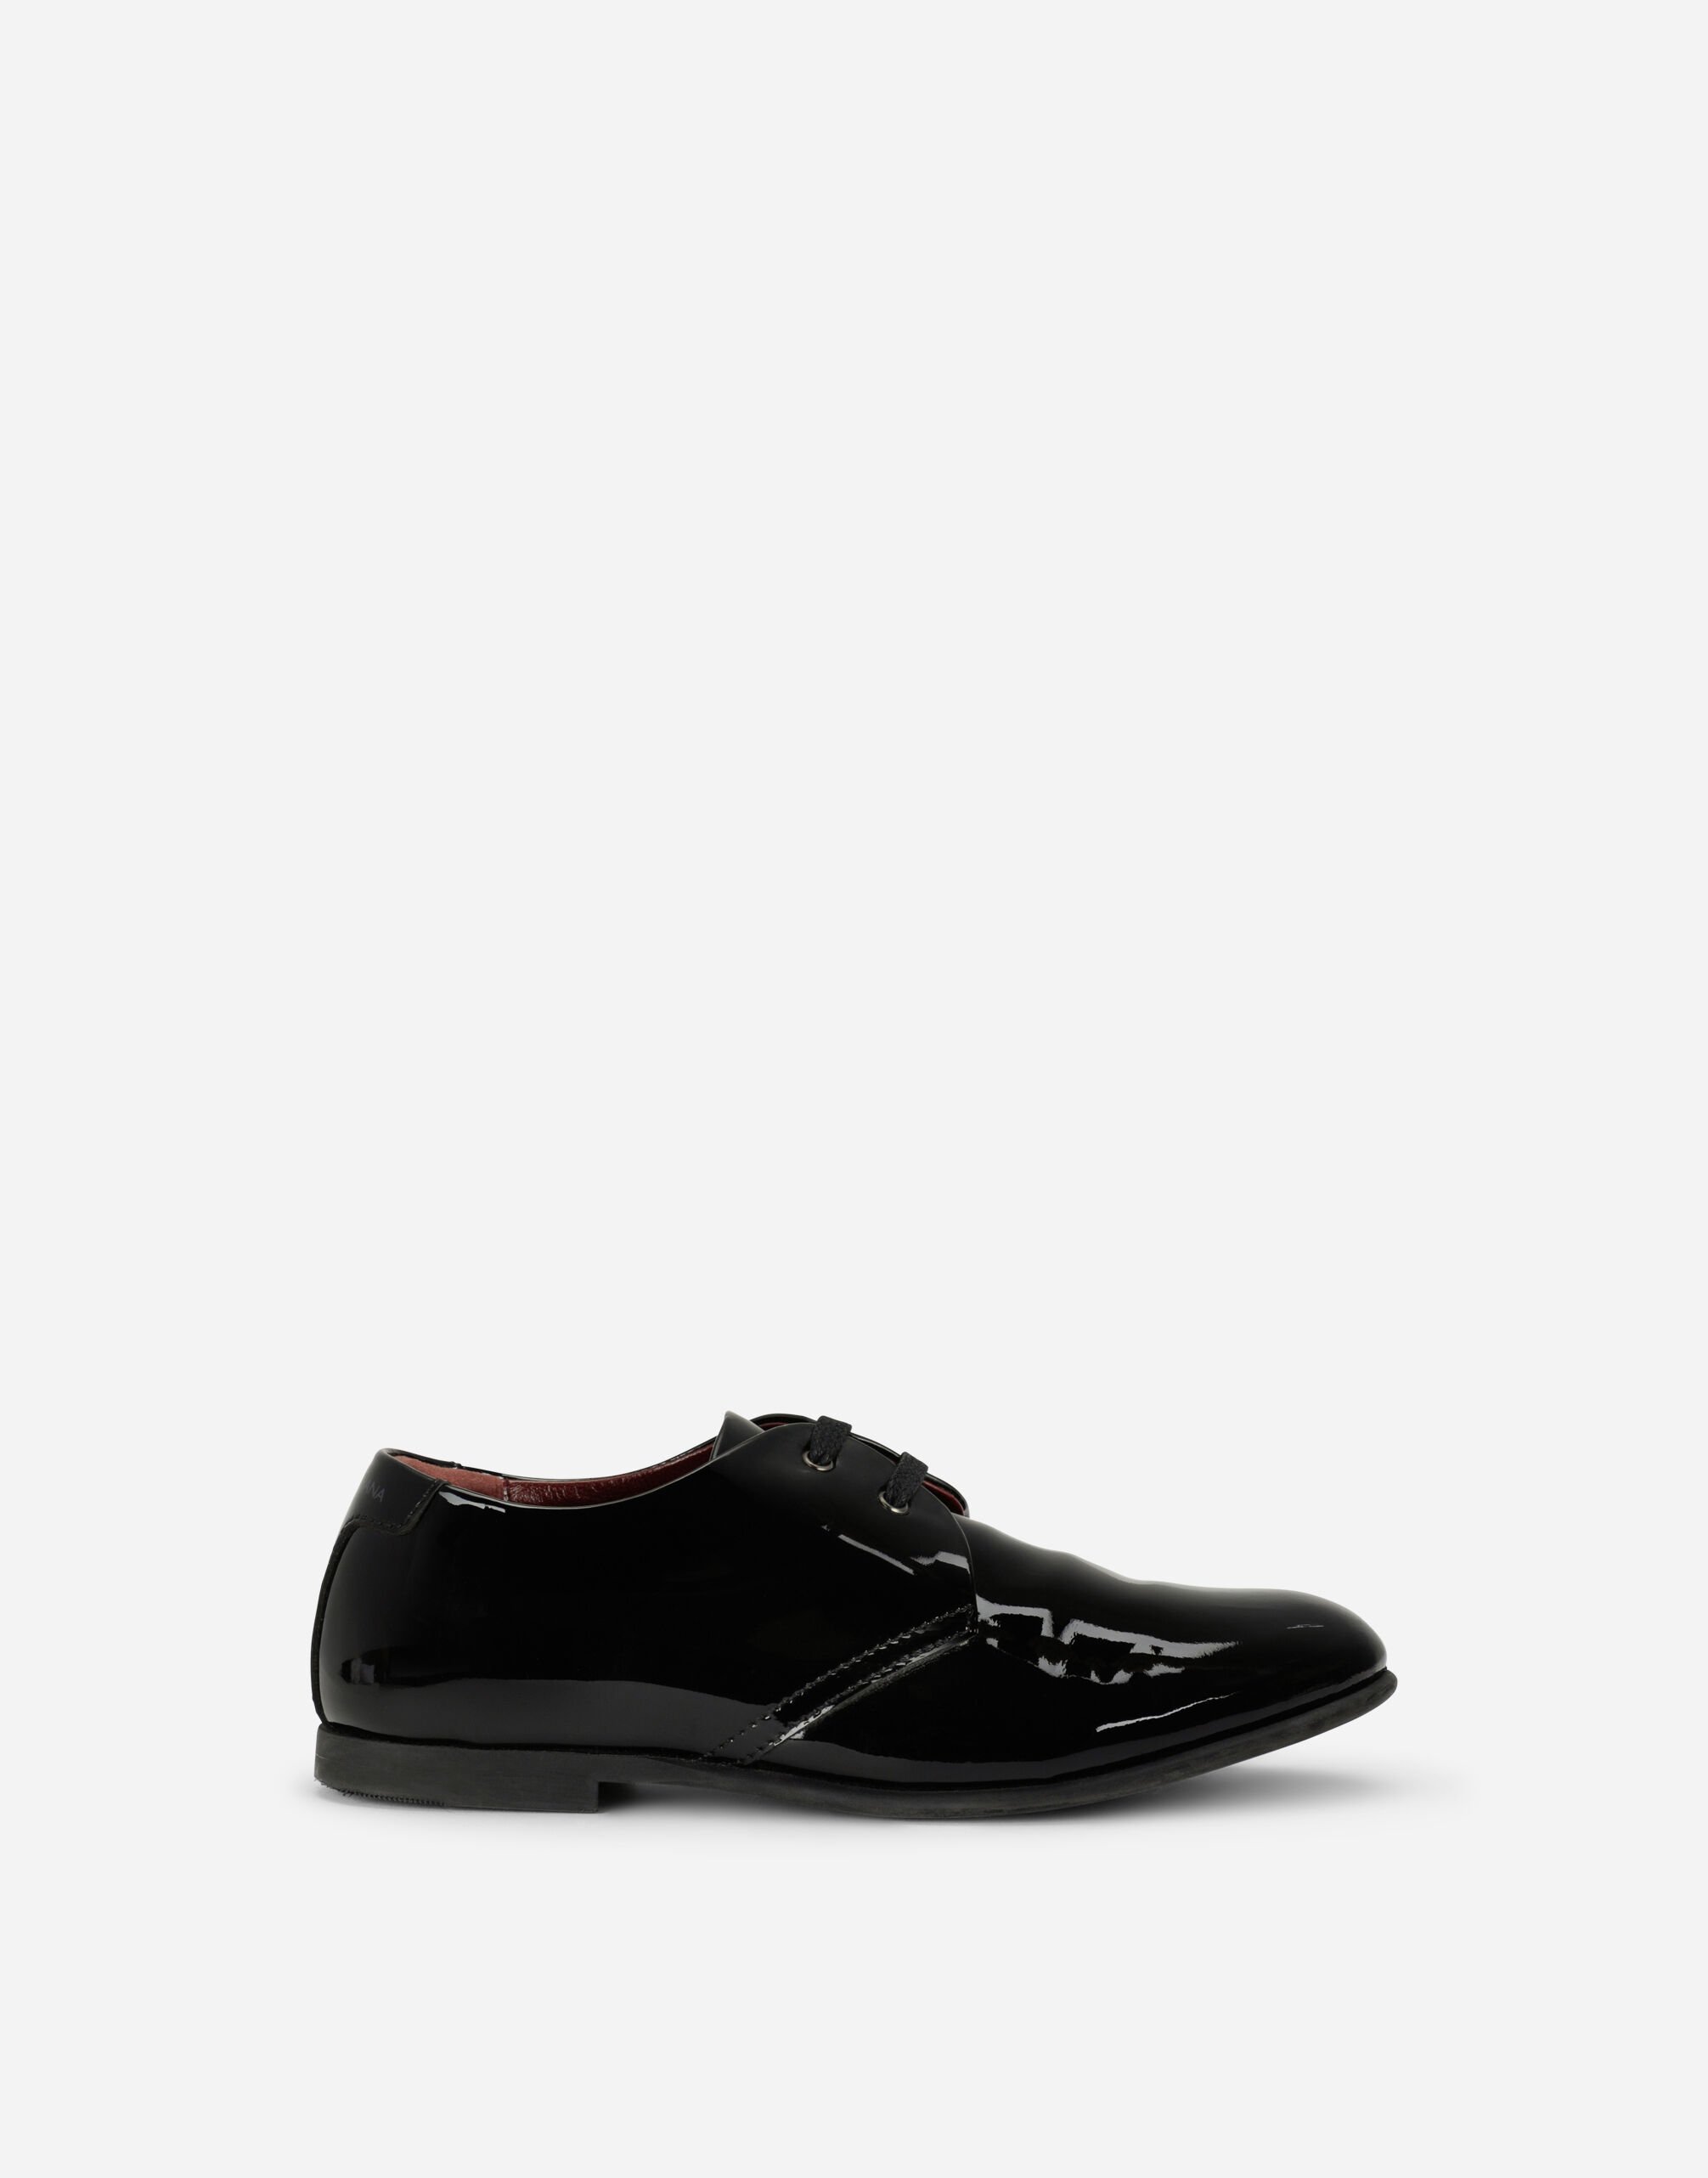 Dolce & Gabbana Patent leather derby shoes Black EB0003AB000